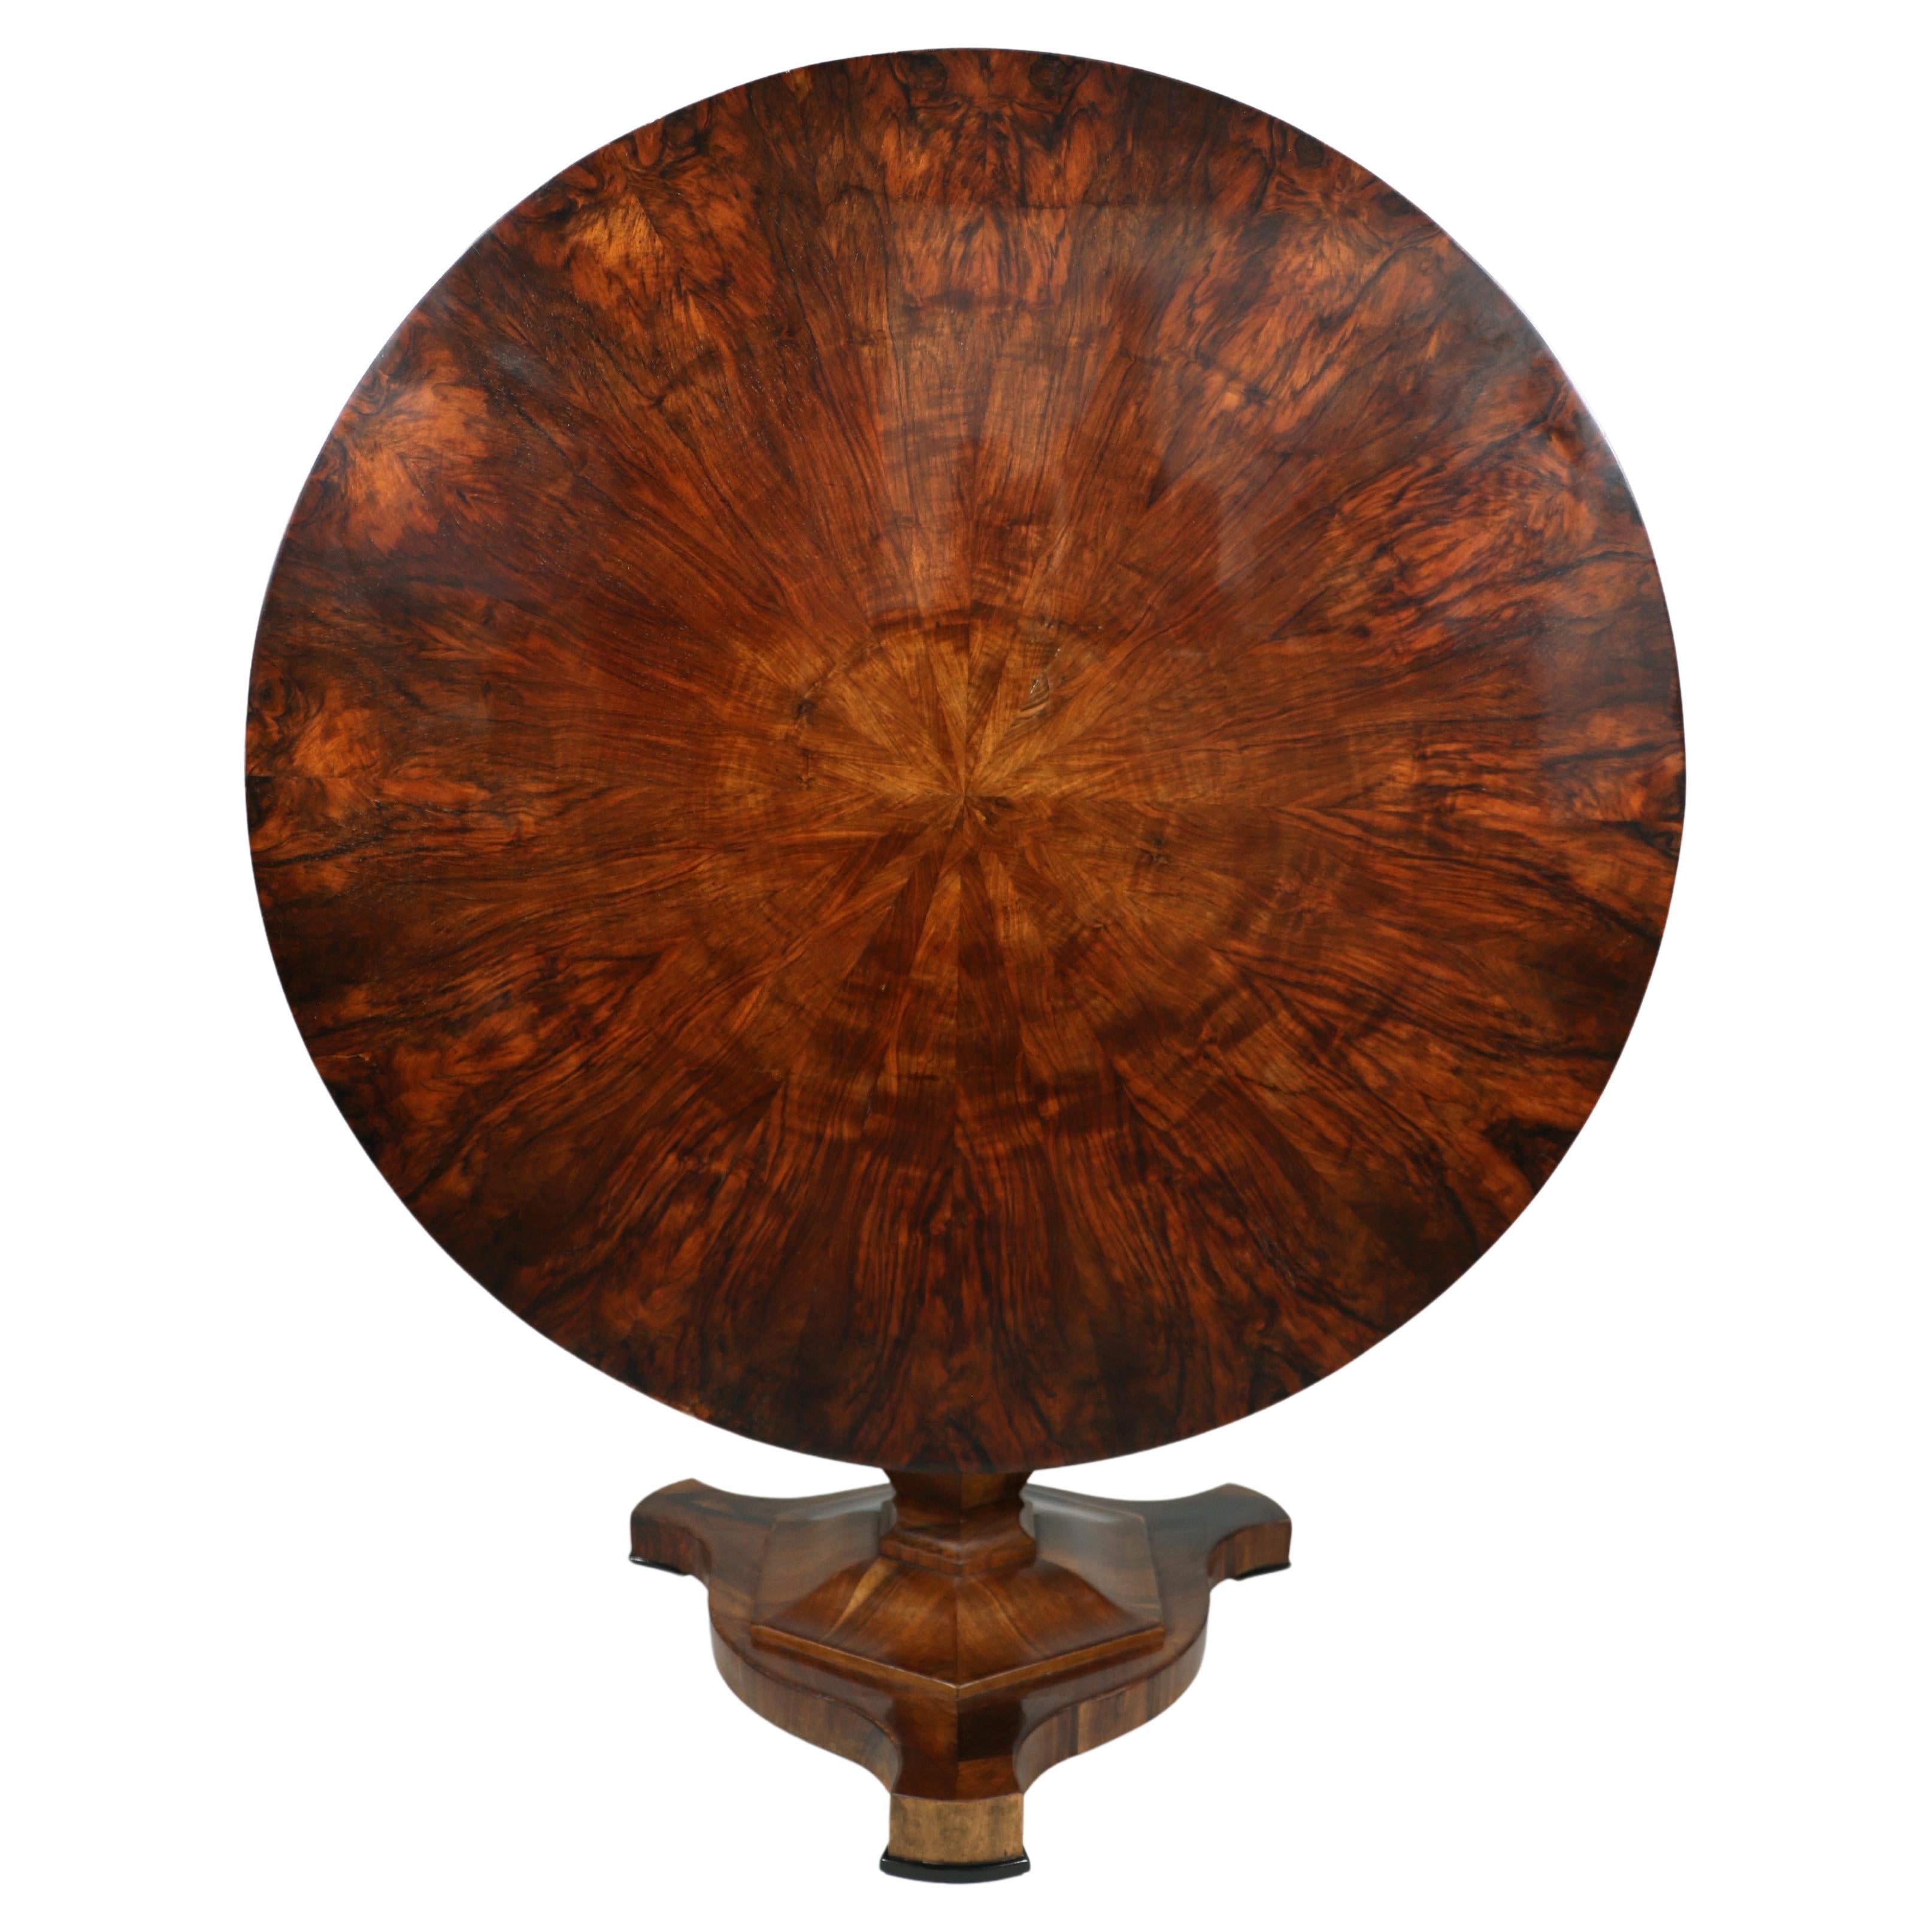 Hello,
This fine and very large Biedermeier walnut table was made in Vienna circa 1825.

Viennese Biedermeier pieces are distinguished by their sophisticated proportions, rare and refined design, excellent craftsmanship and continue to have a great